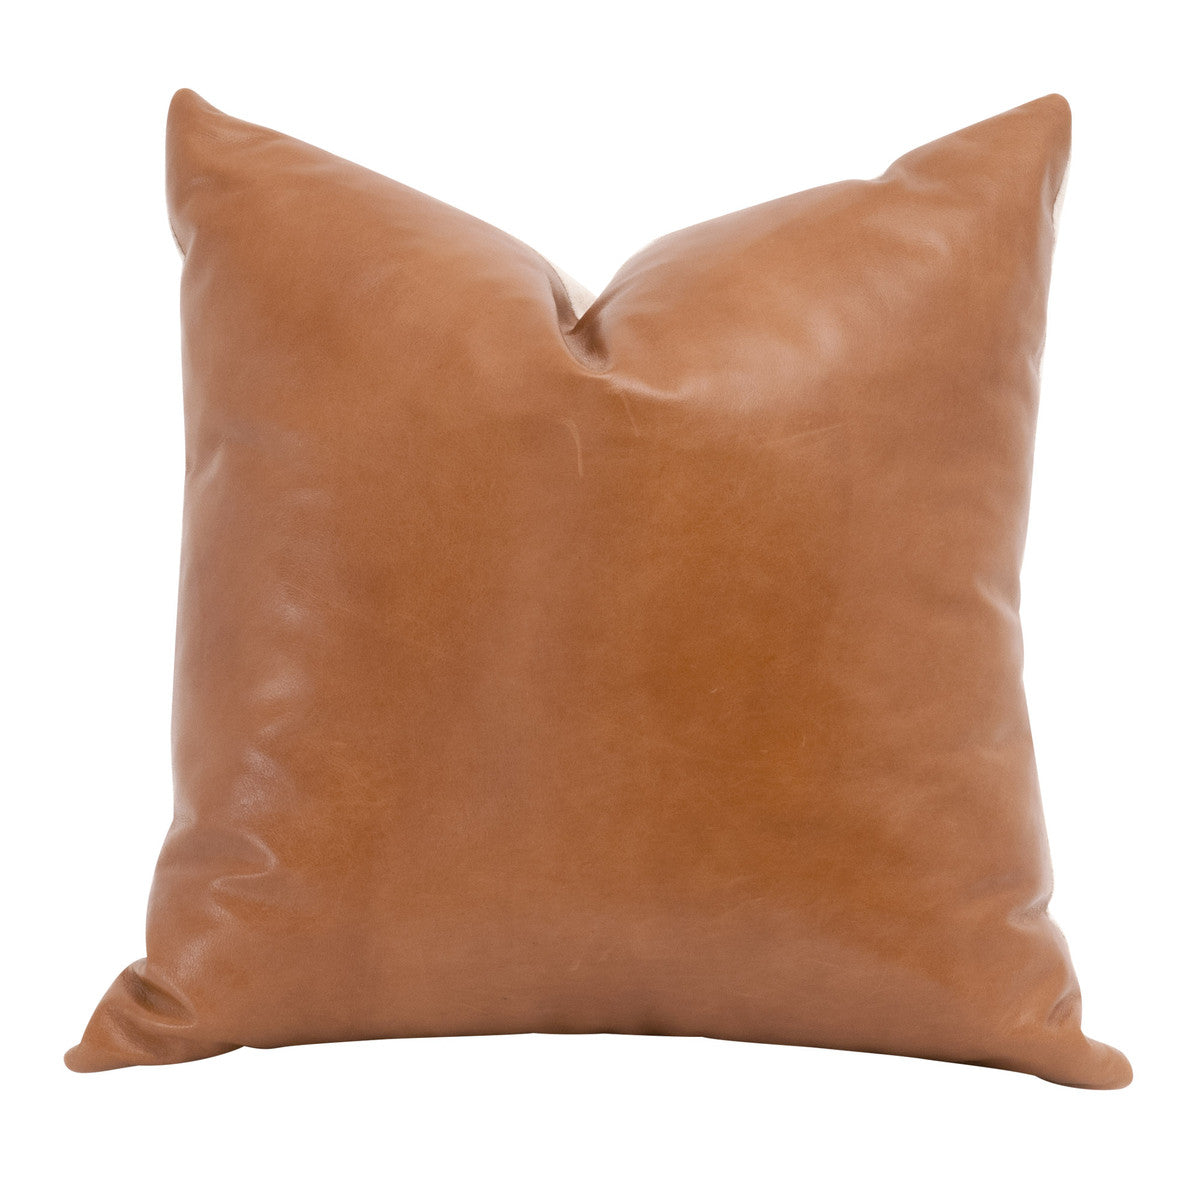 The Better Together 22" Essential Pillow - Set of 2